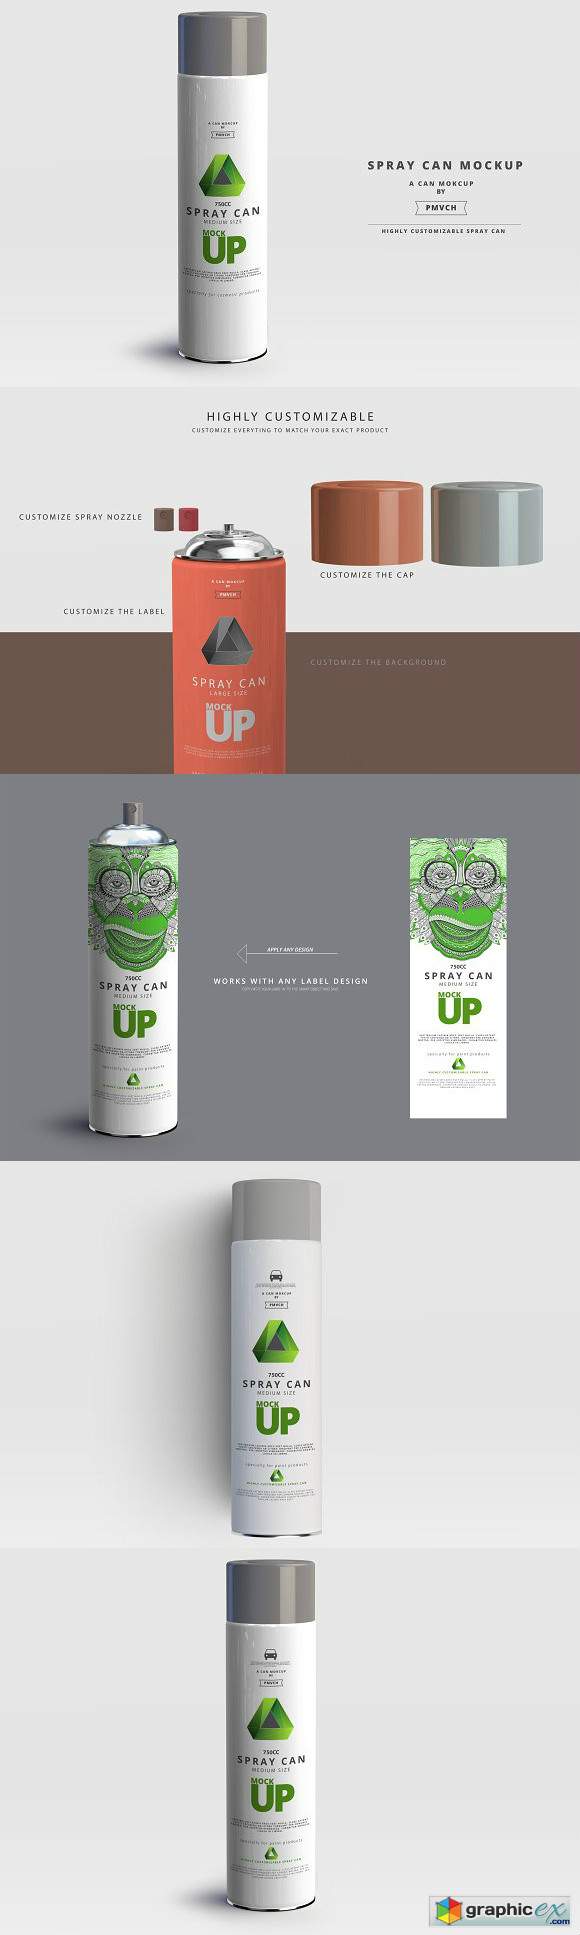 Spray Can Mockup - Large Size